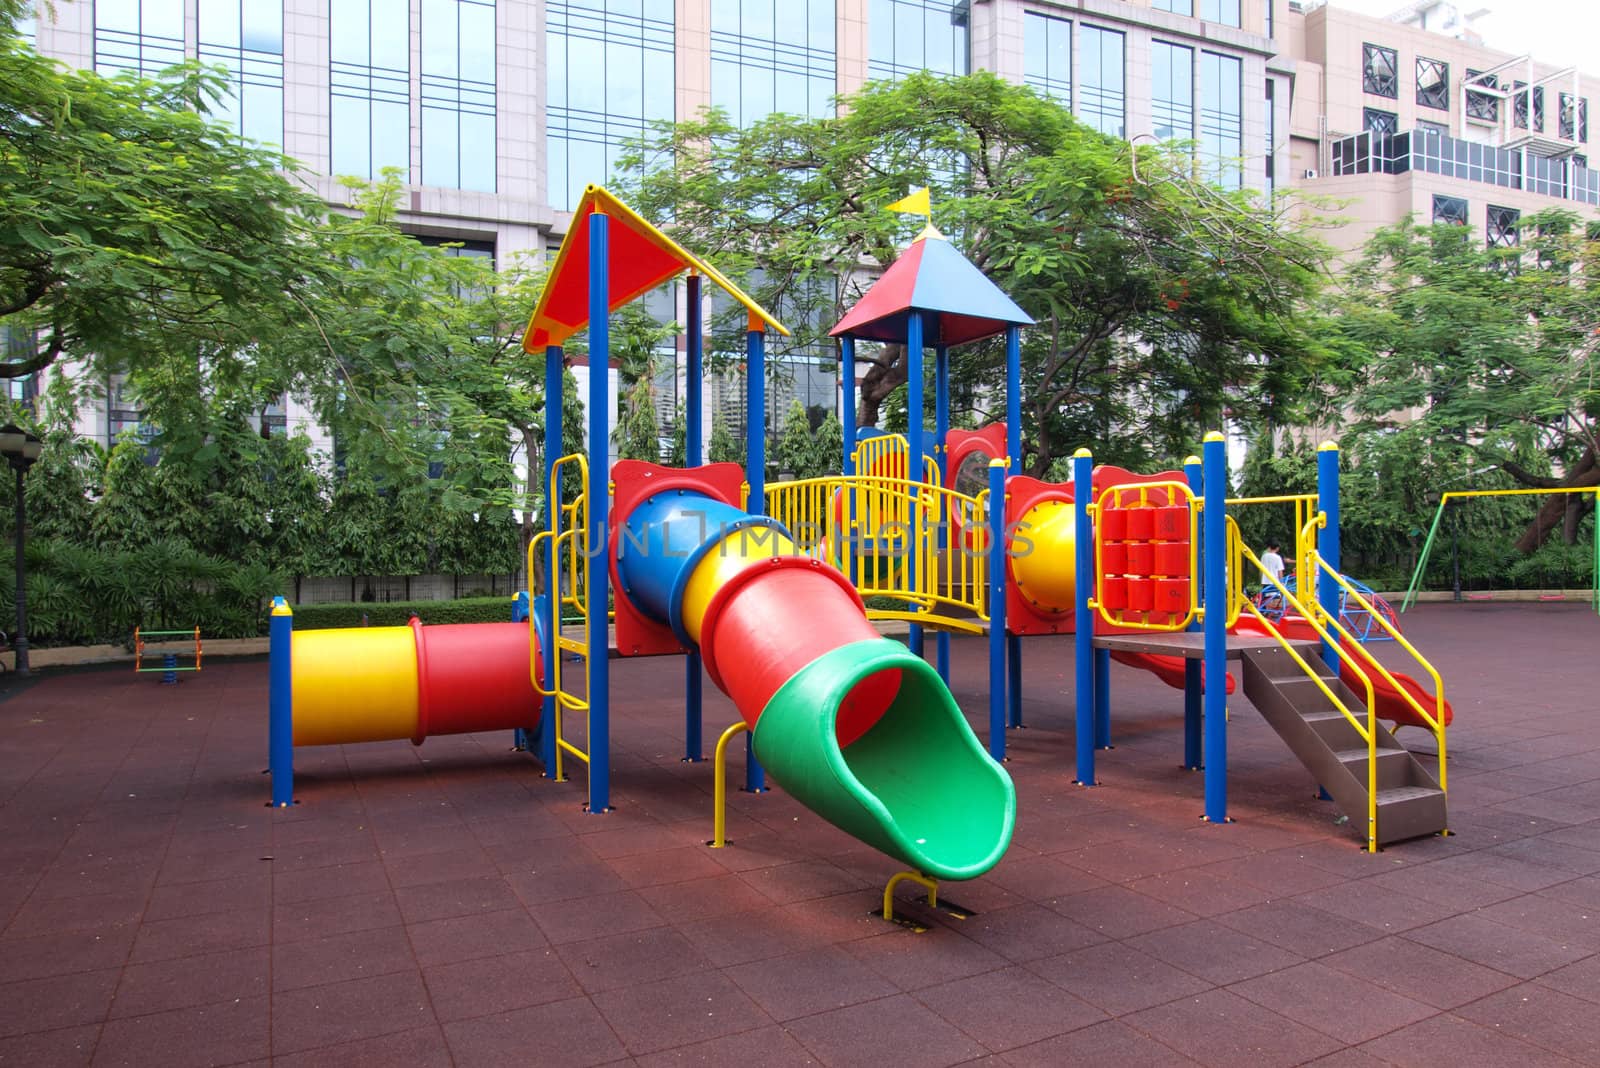 Colorful playground in a city park.